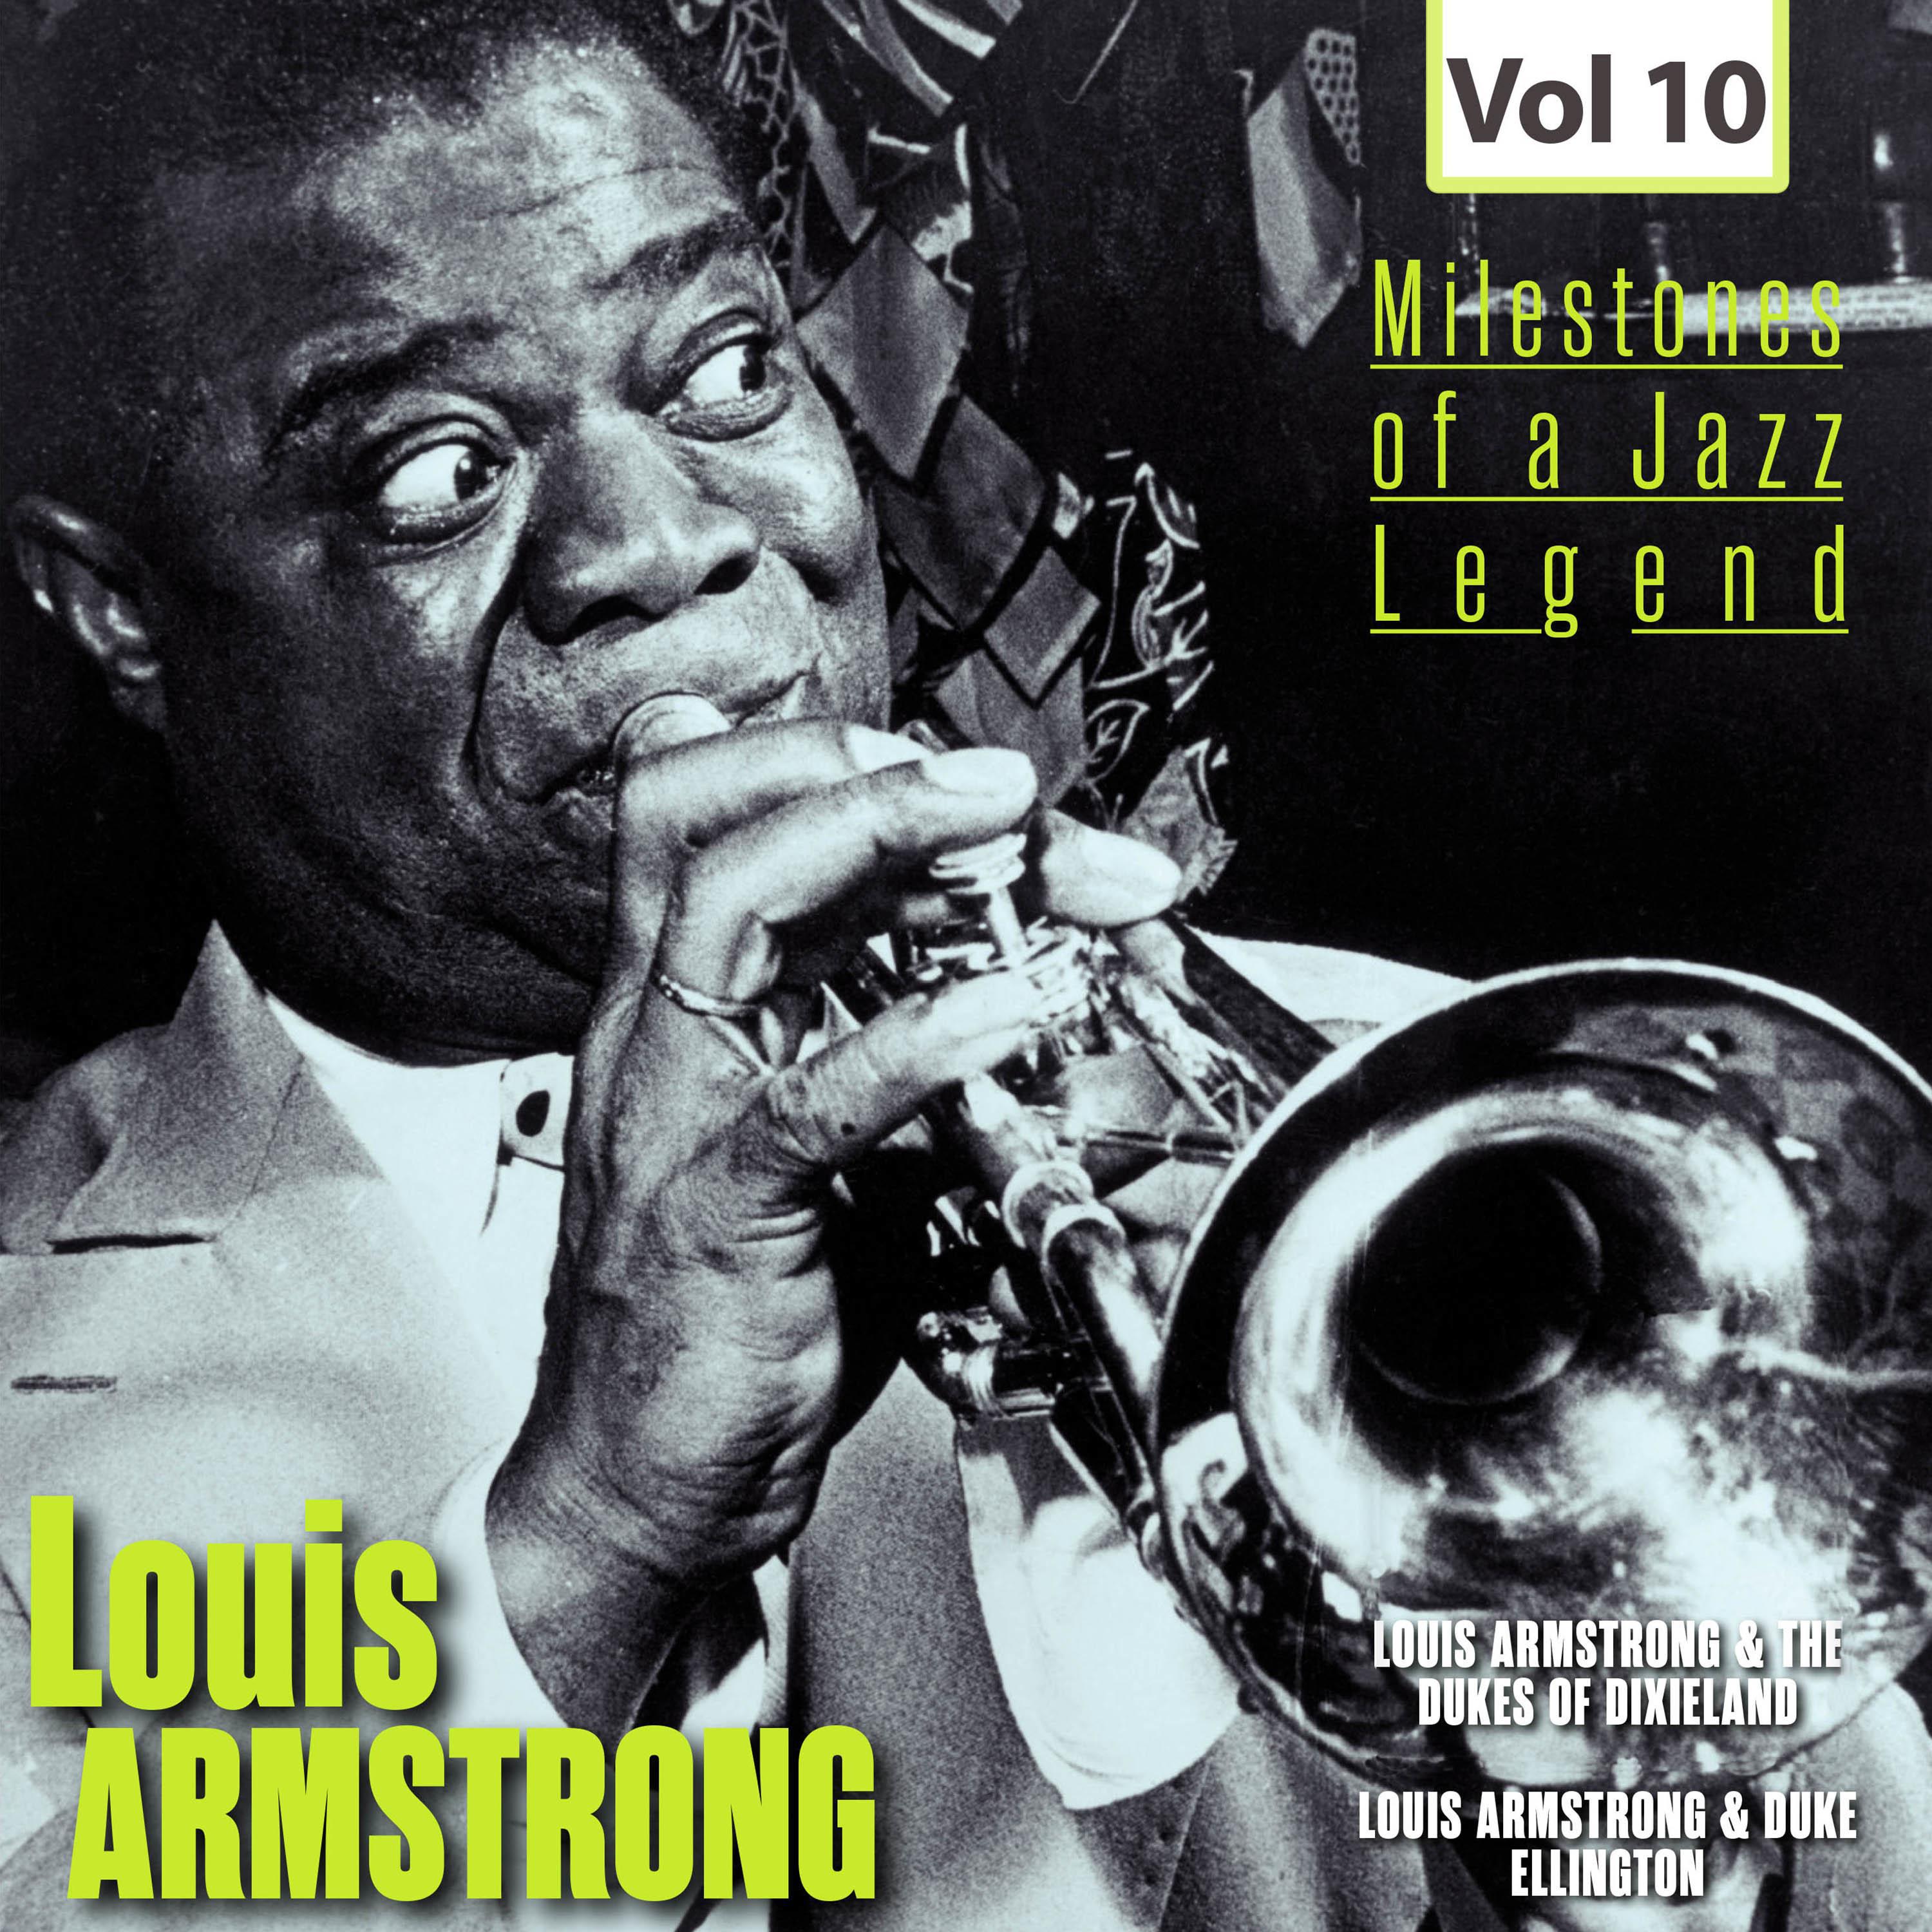 Milestones of a Jazz Legend - Louis Armstrong, Vol. 10